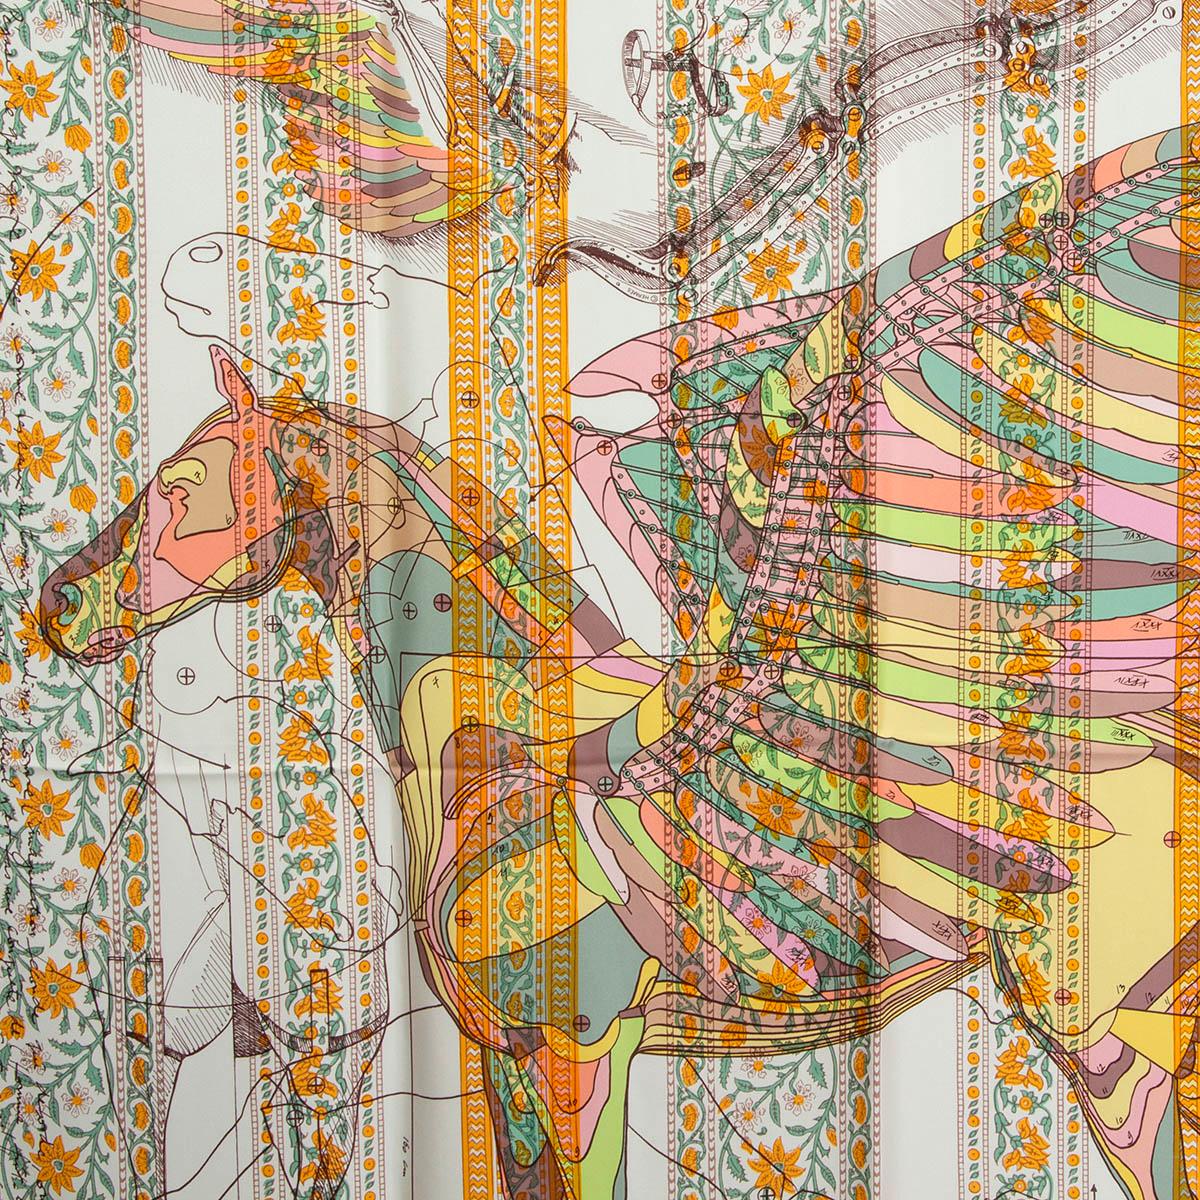 100% authentic Hermès 'Le Pegase d'Hermes au Bloc 140' scarf in white silk twill (100%) with contrast taupe hem and details in yellow, pink and green. Has been worn and is in excellent condition.

Measurements
Width	140cm (54.6in)
Height	140cm